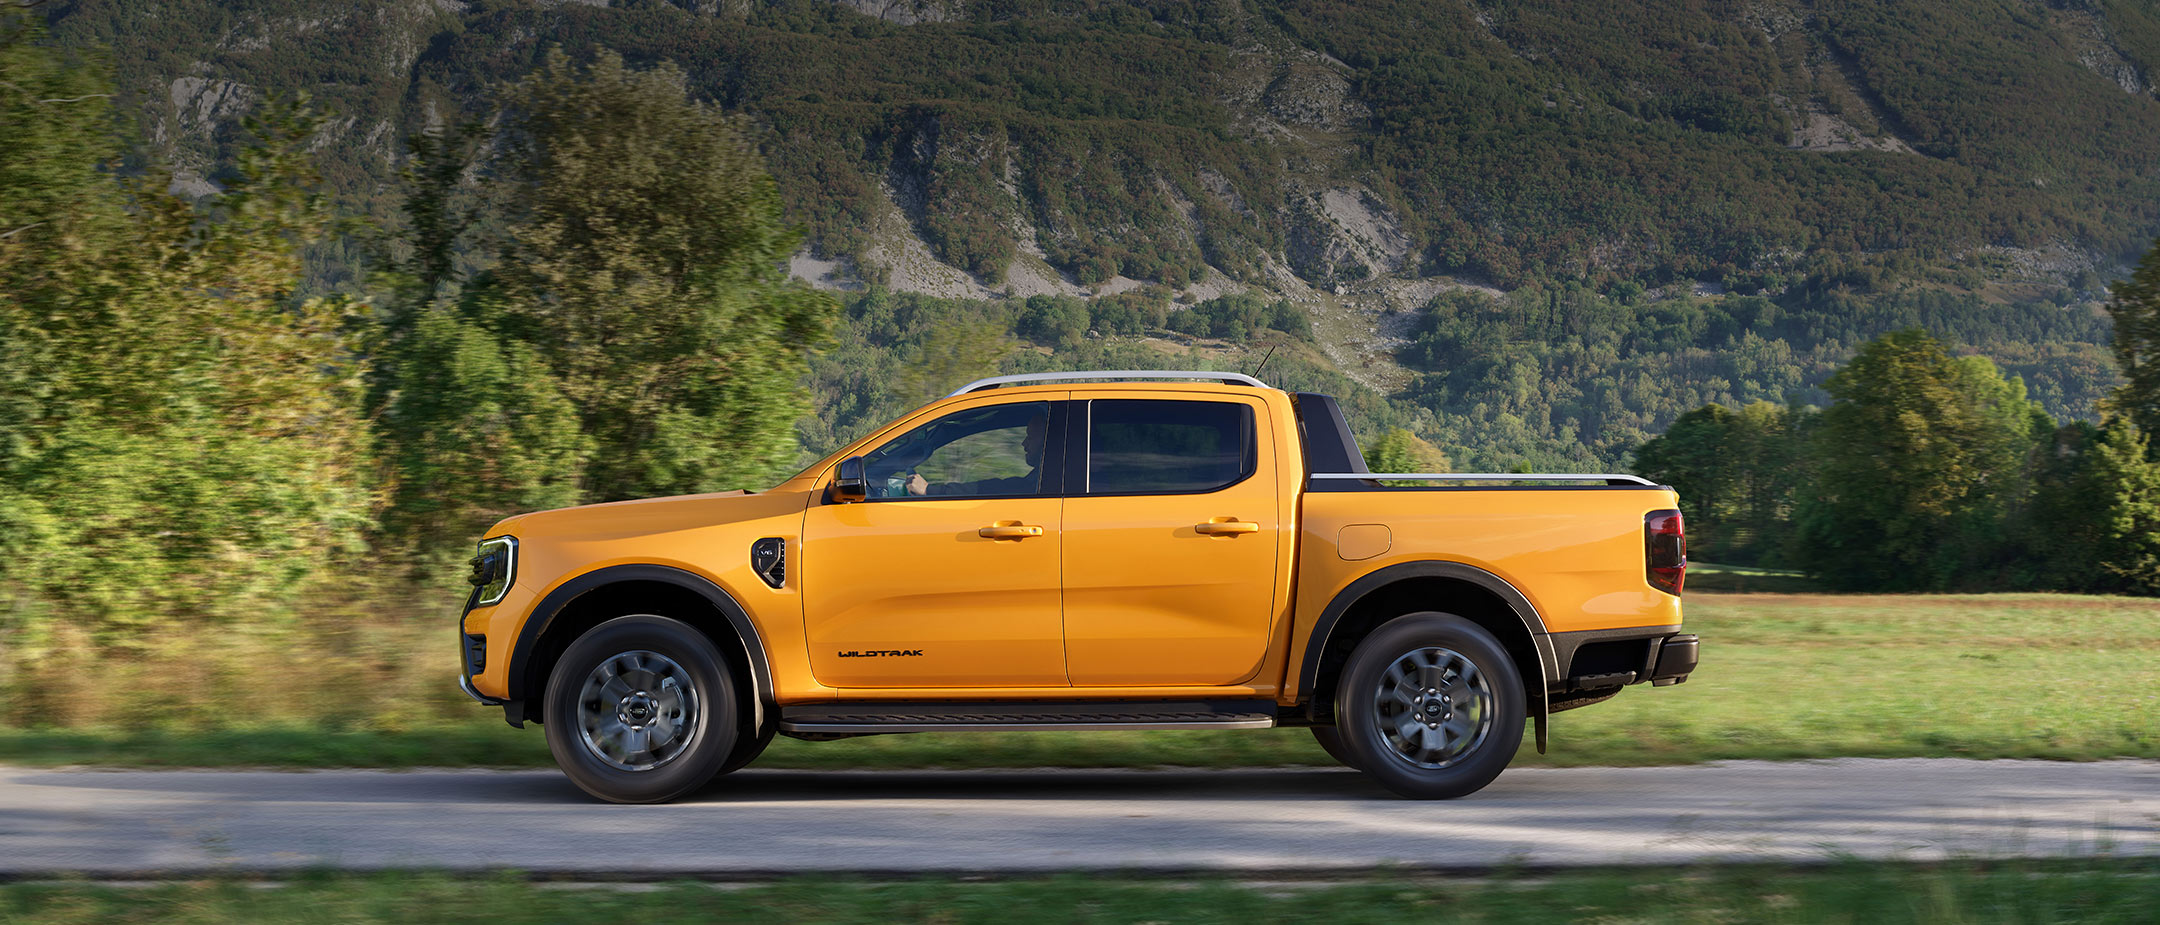 All-New Ford Ranger side view driving on county road